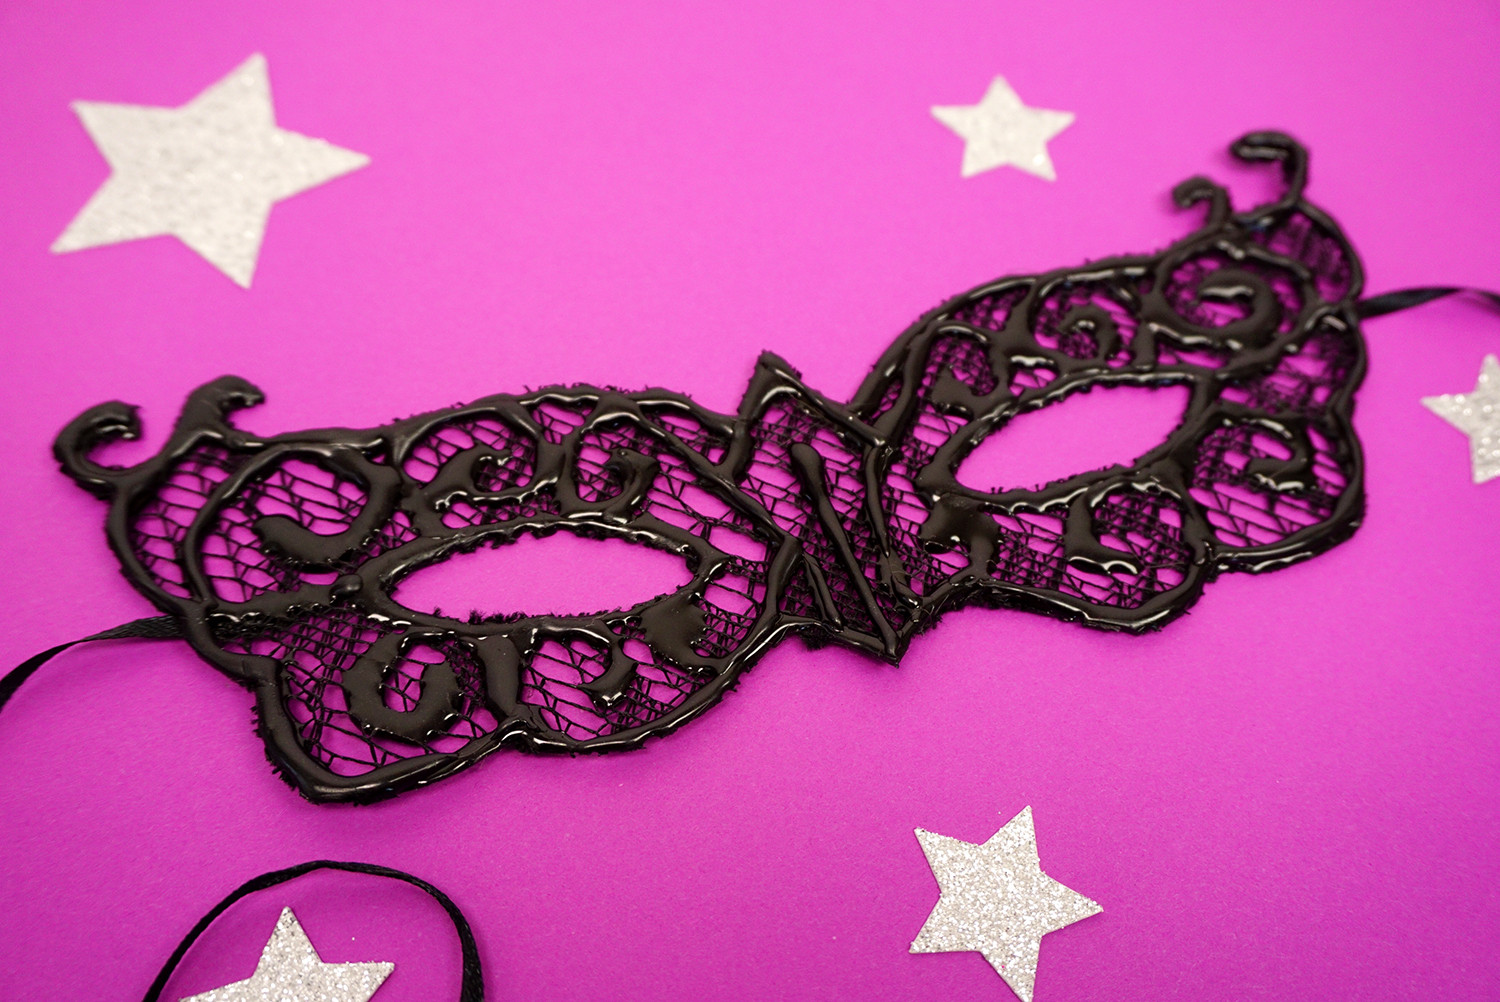 DIY Masquerade Mask Template
 Easy DIY Lace Masquerade Mask from Hot Glue Happiness is